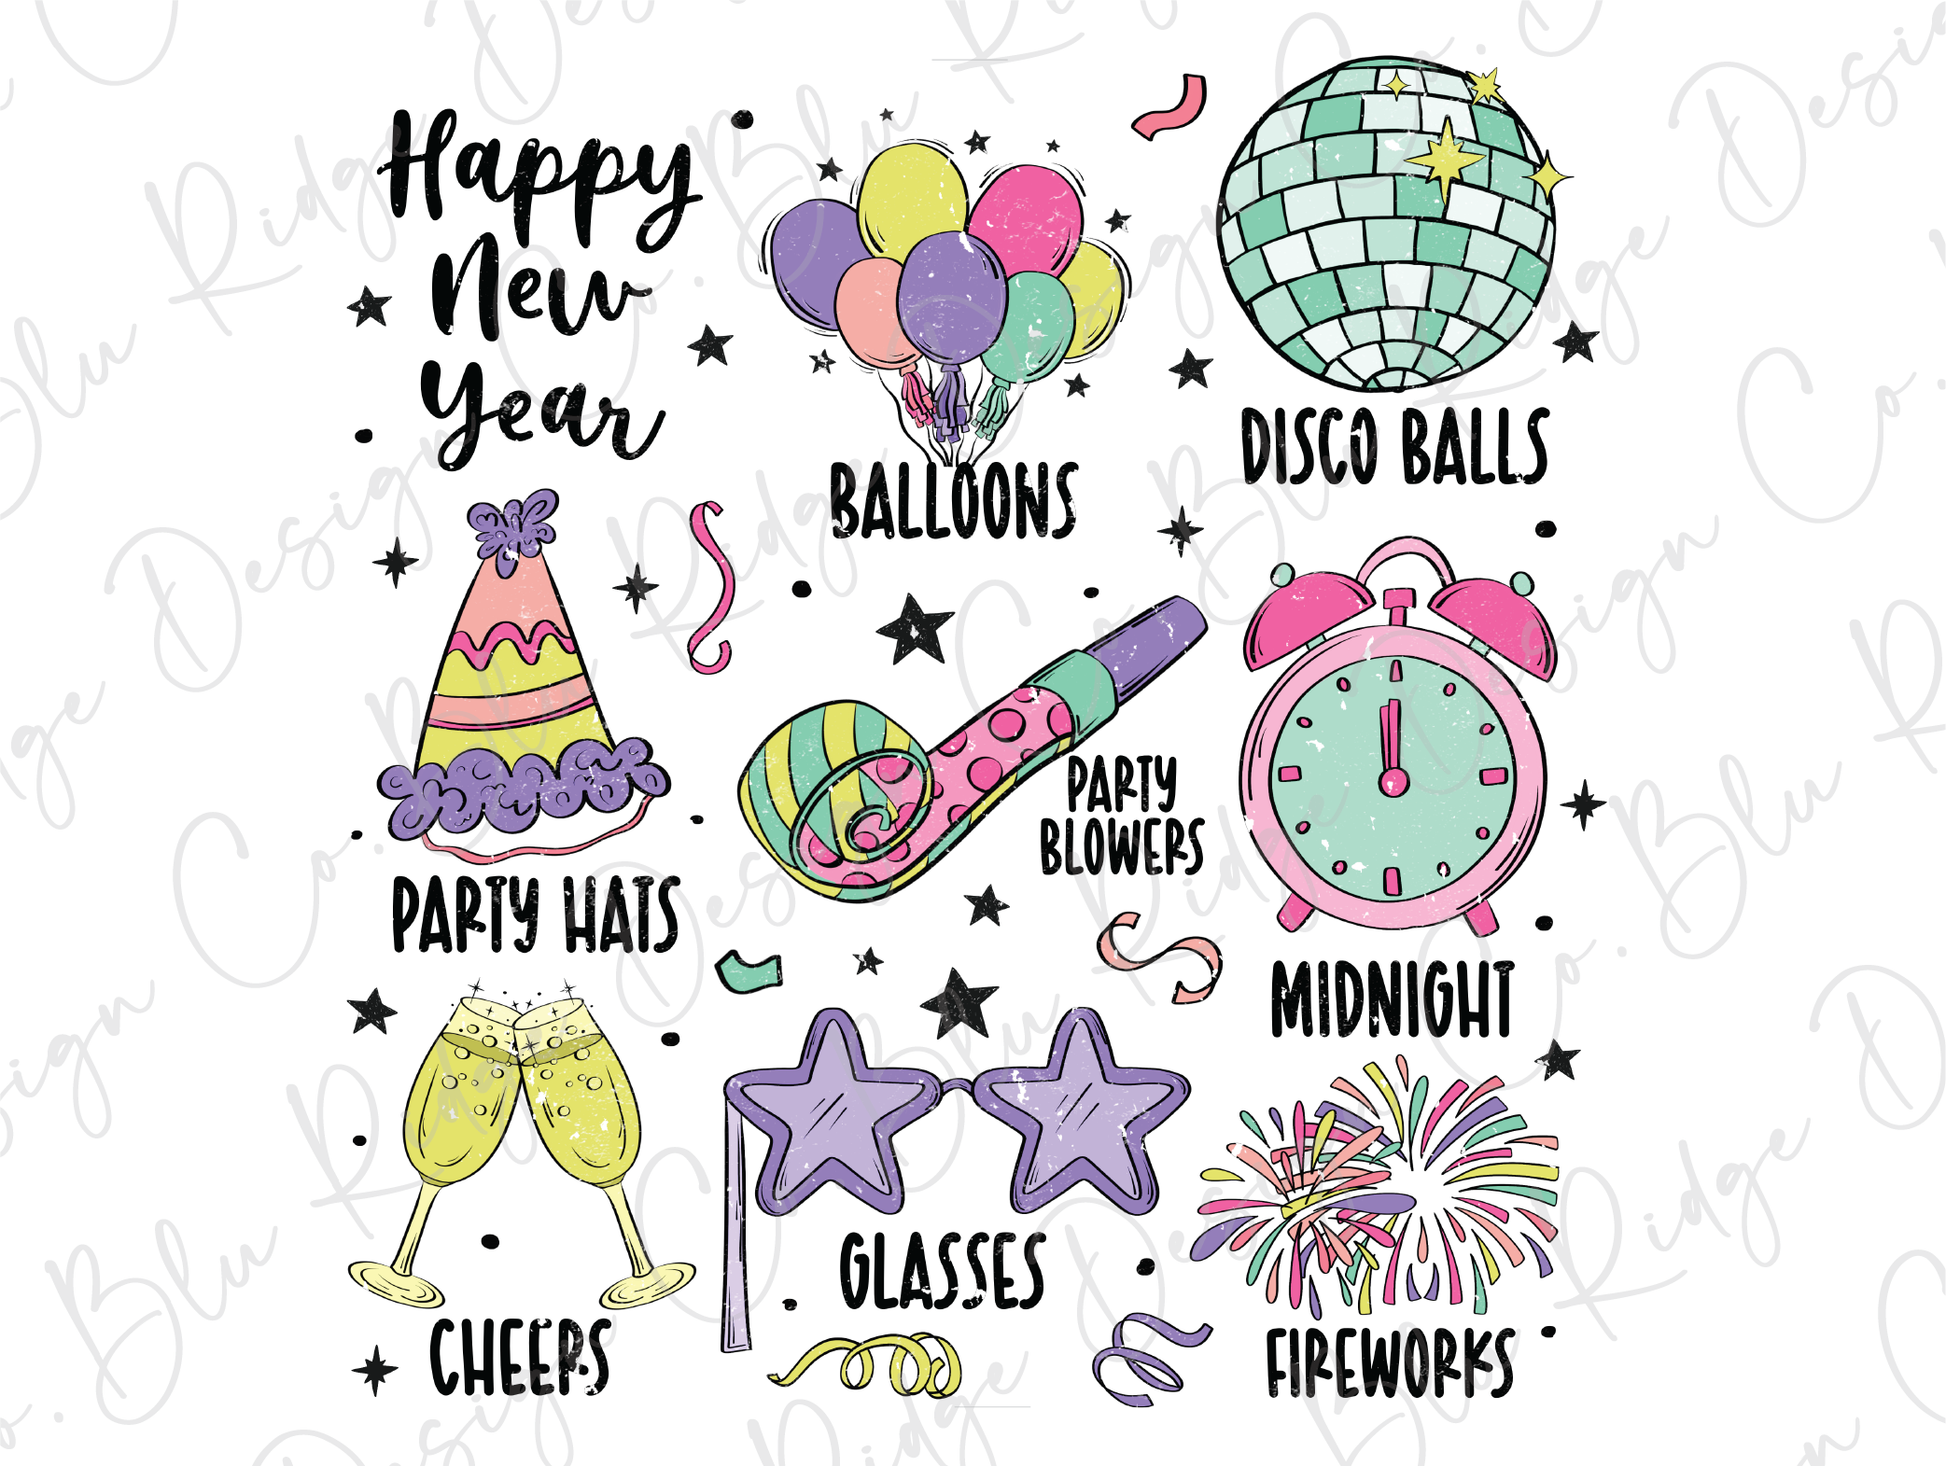 a new year's eve card with balloons, balloons, a clock, a